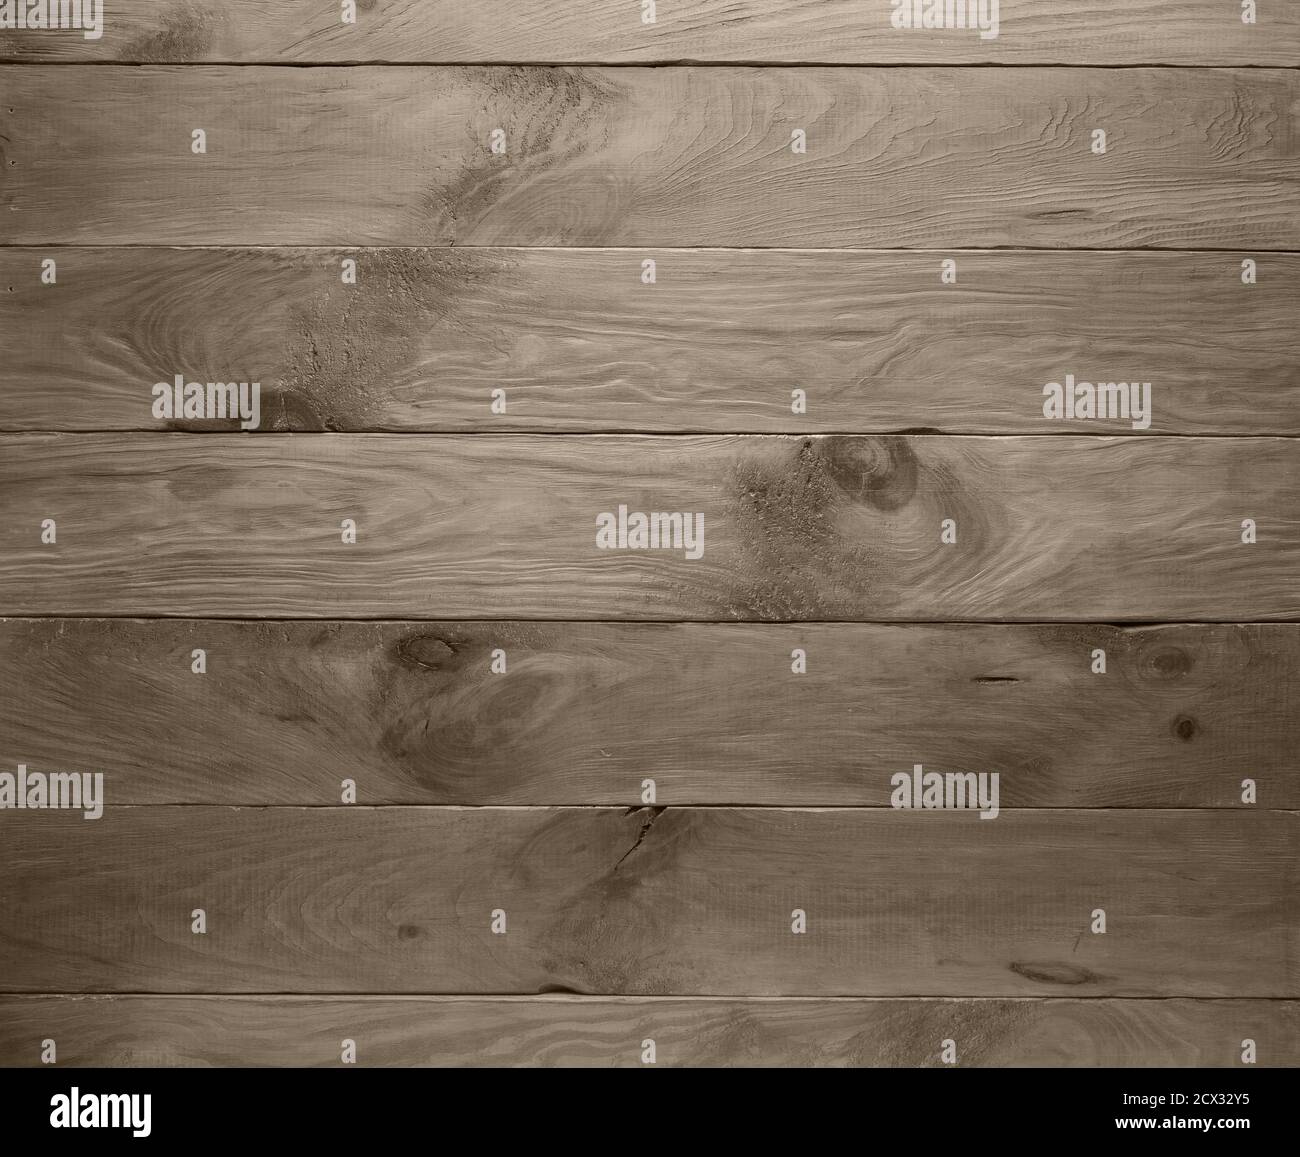 Empty handmade background made of natural wooden planks toned in warm gray color shades. Surface has textured scratches, spots and stains. Horizontal Stock Photo